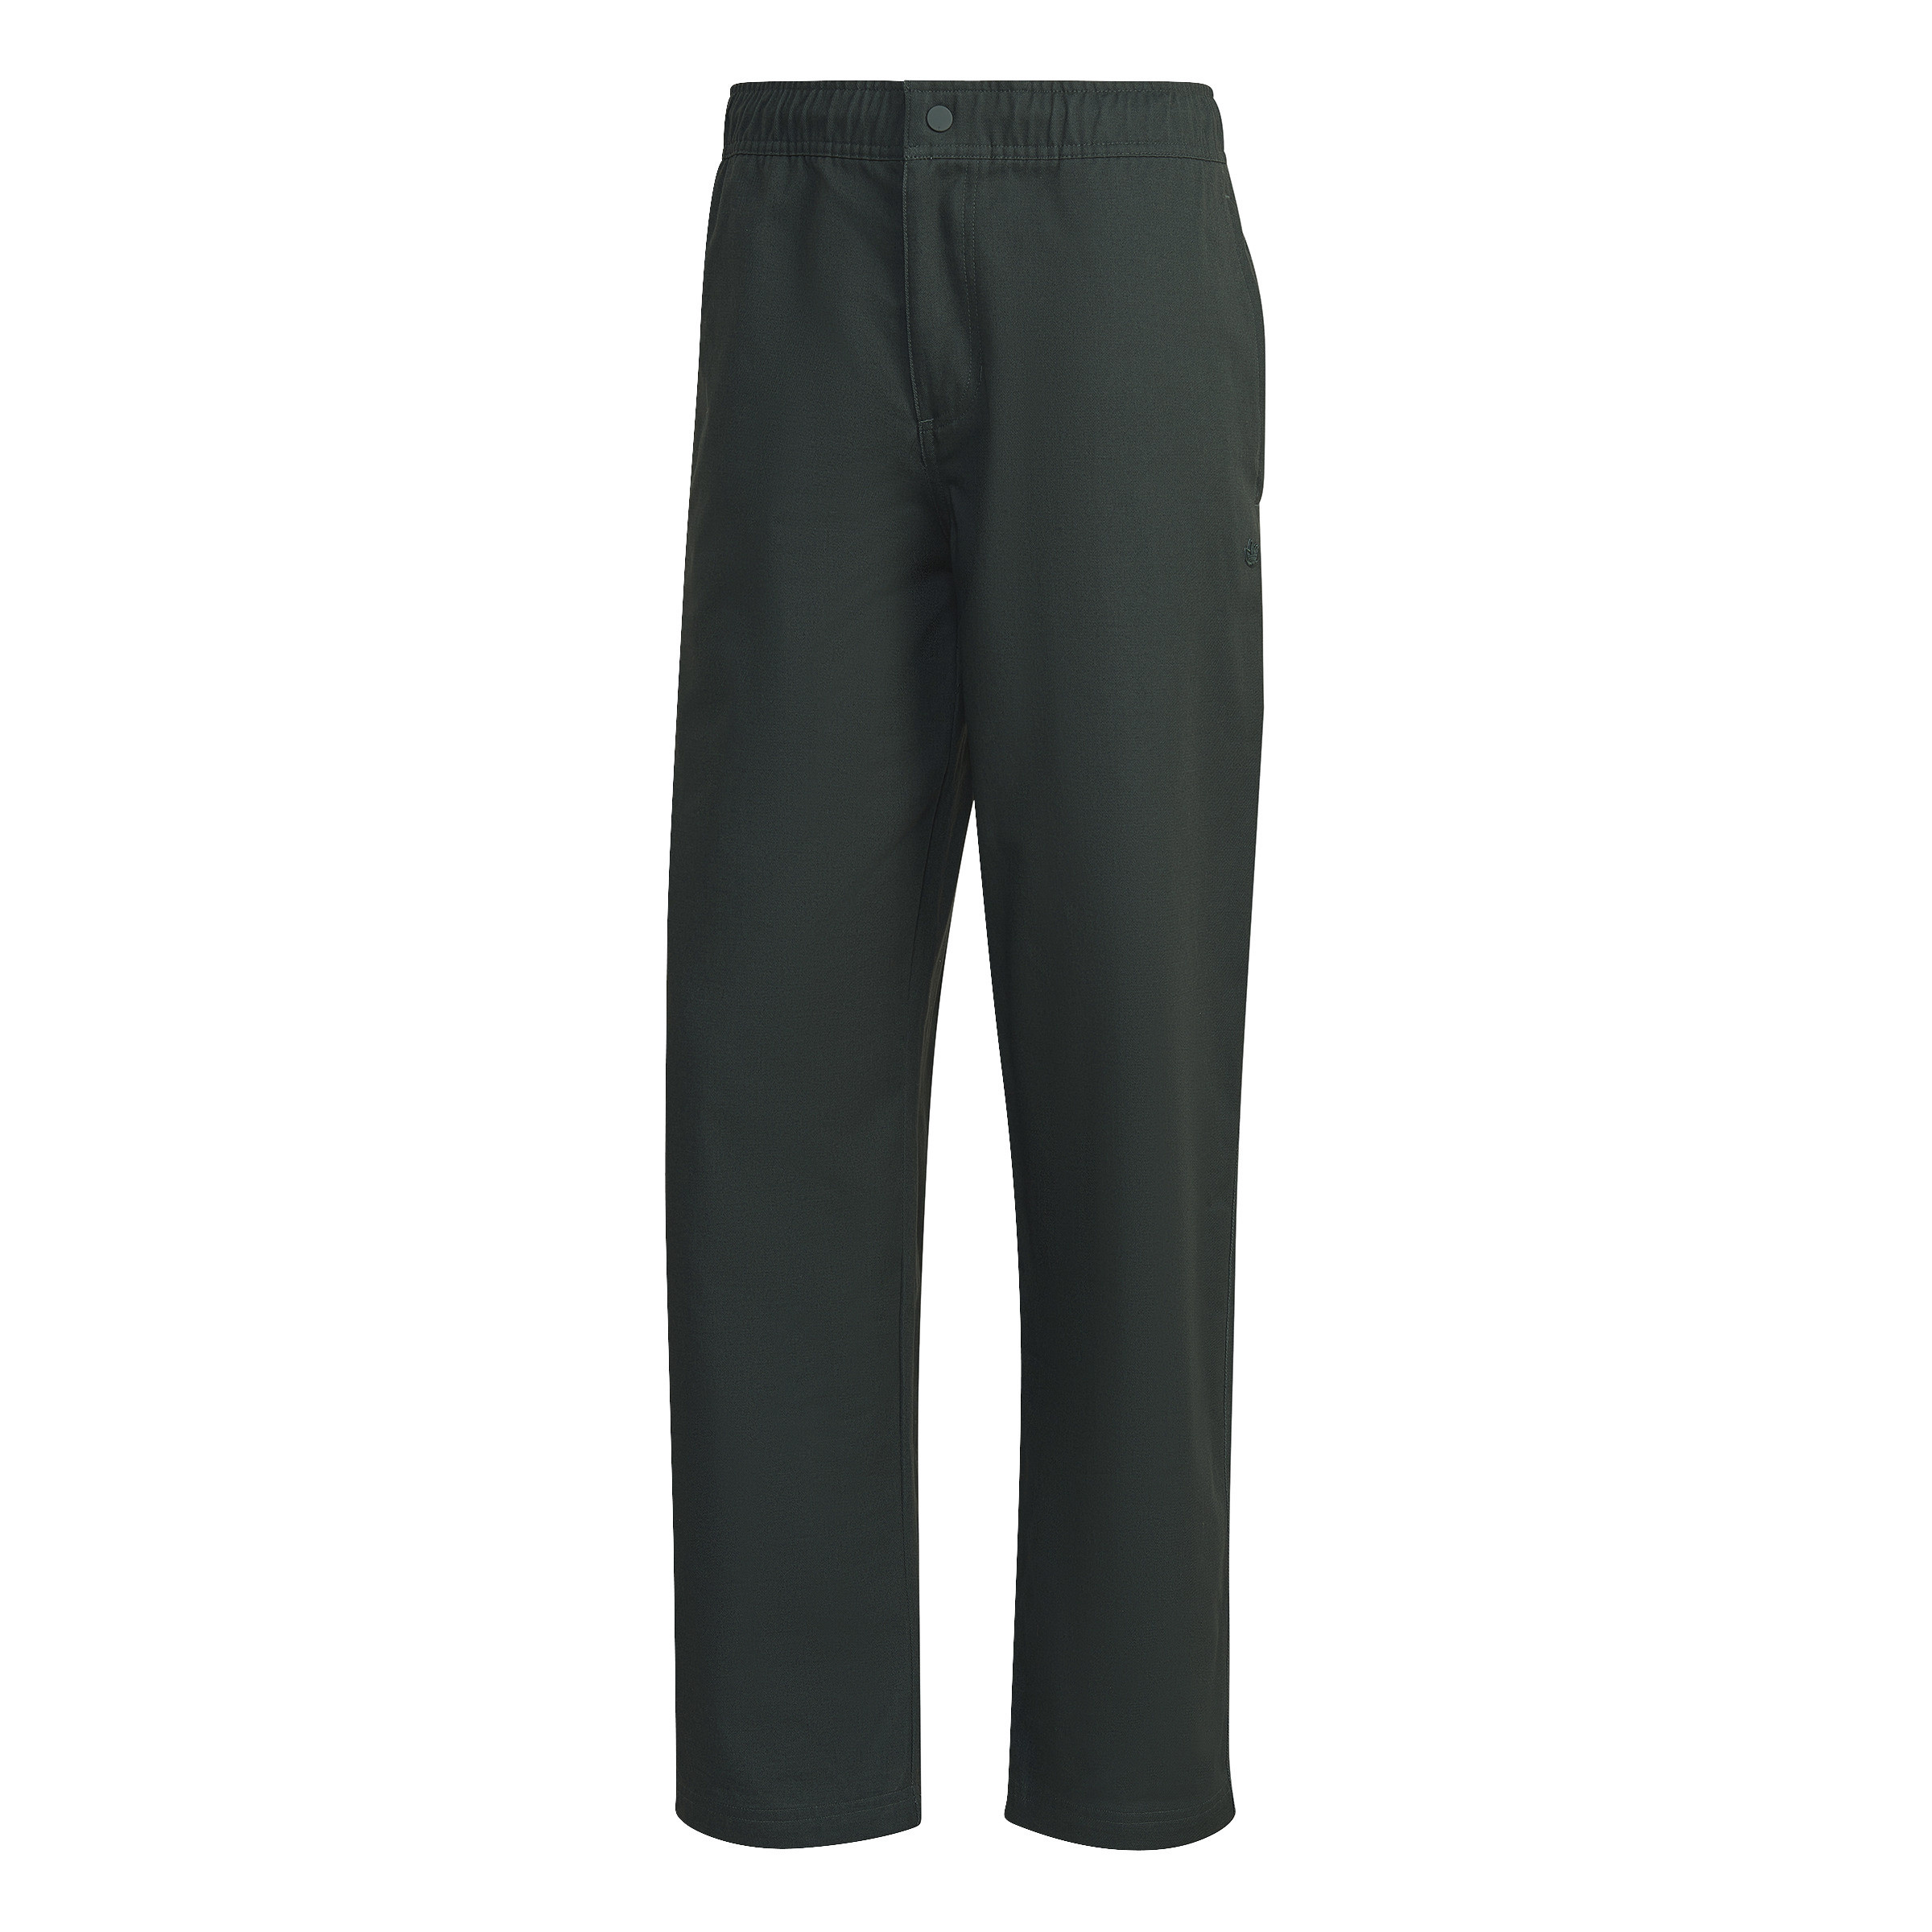 Adidas - Chino adicolor trousers, Dark Green, large image number 0